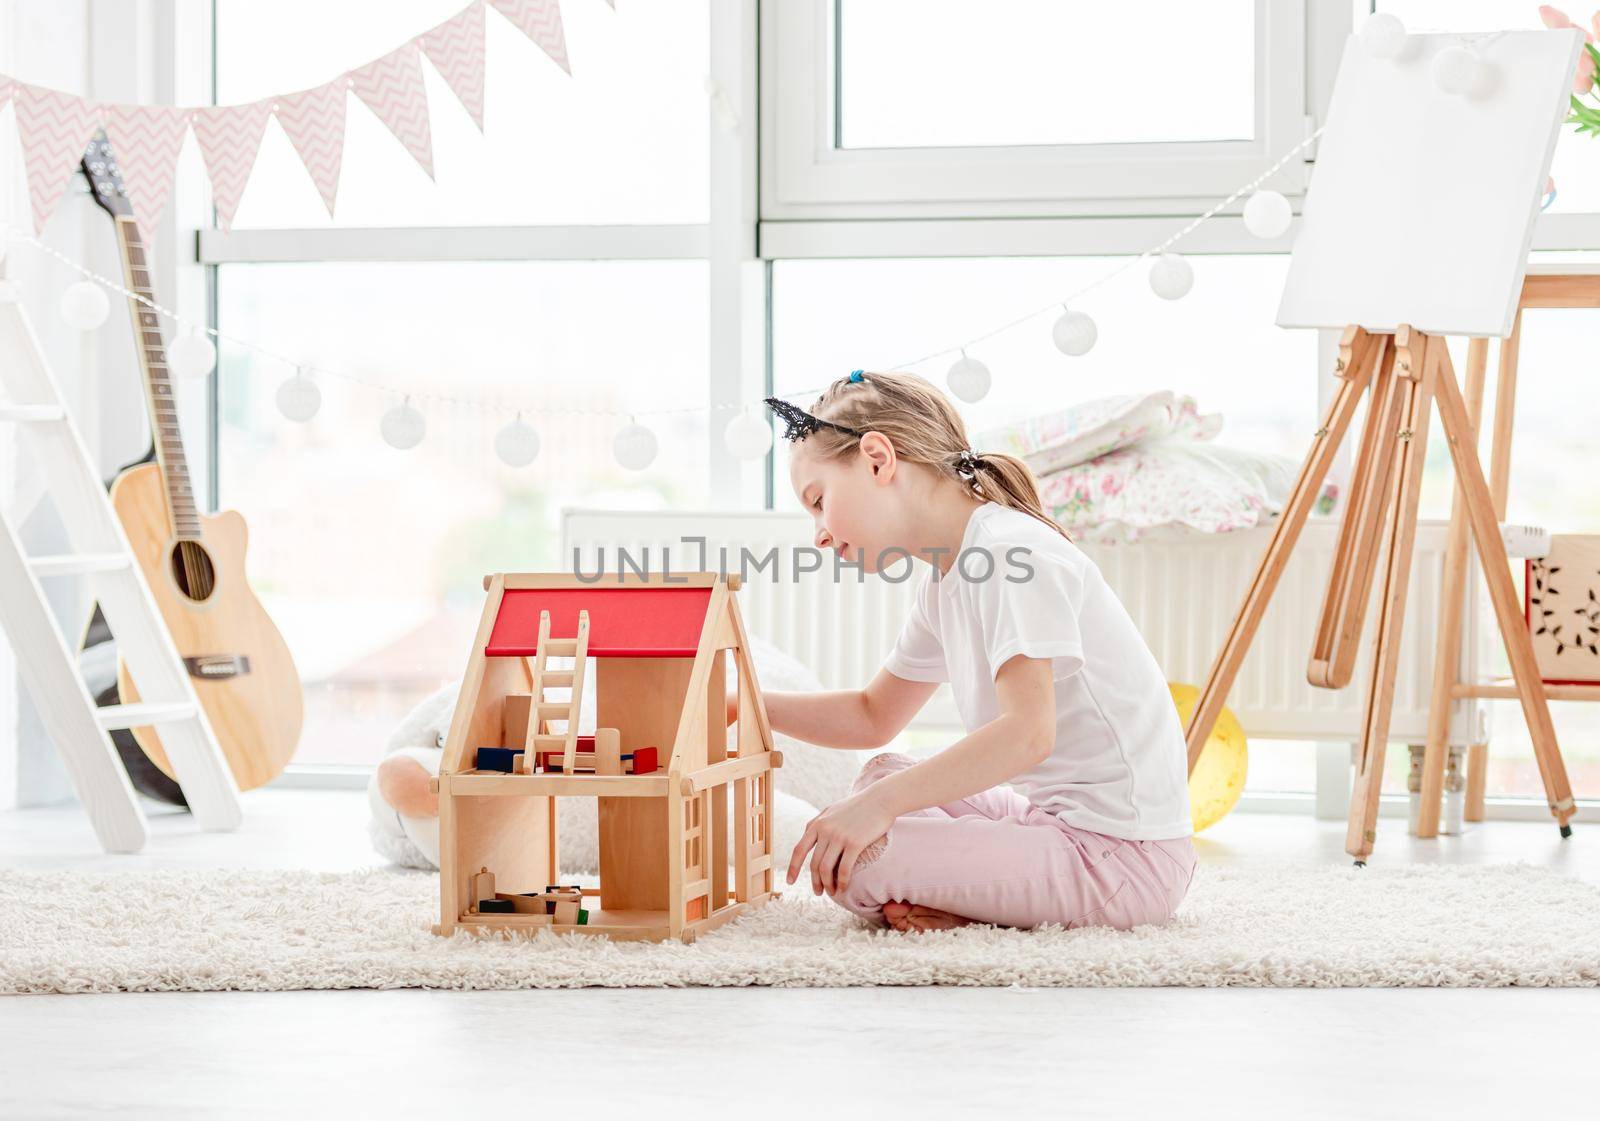 Pretty little girl plays with wooden dollhouse in children's room